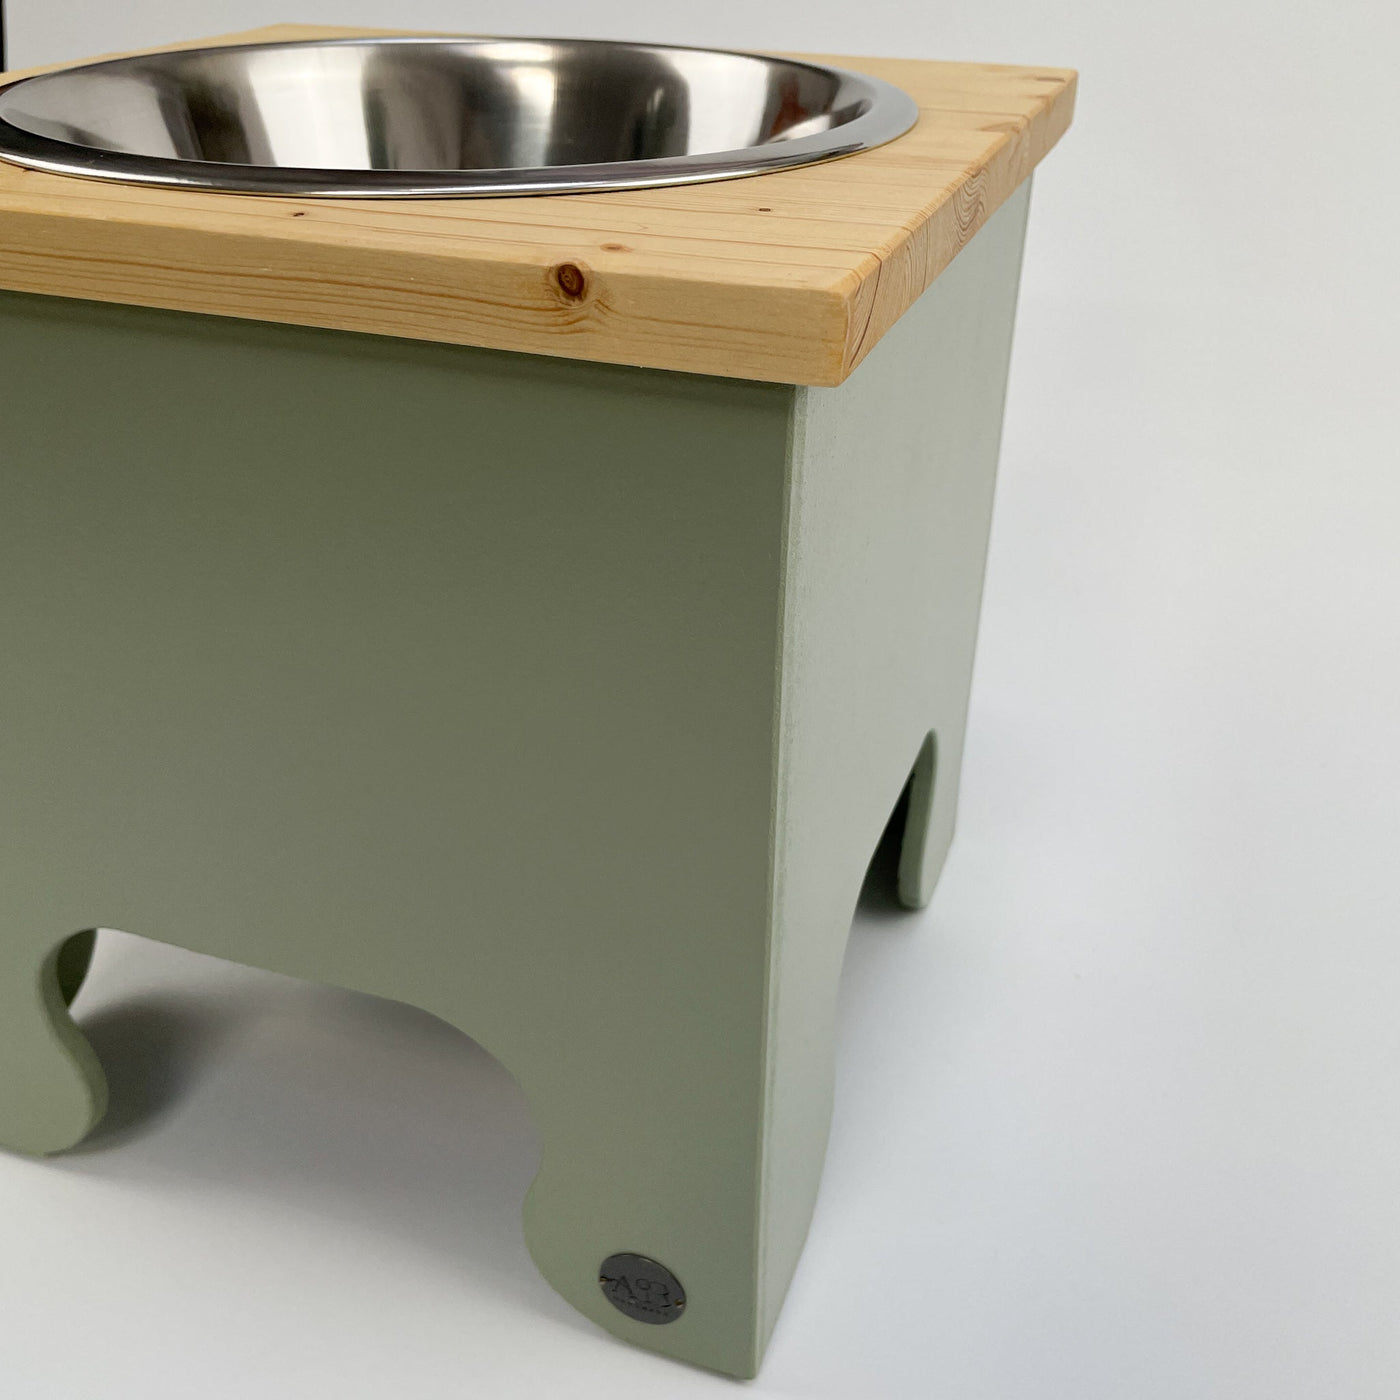 Pine top feeding stand for cats , dogs and puppies in colour soft green.